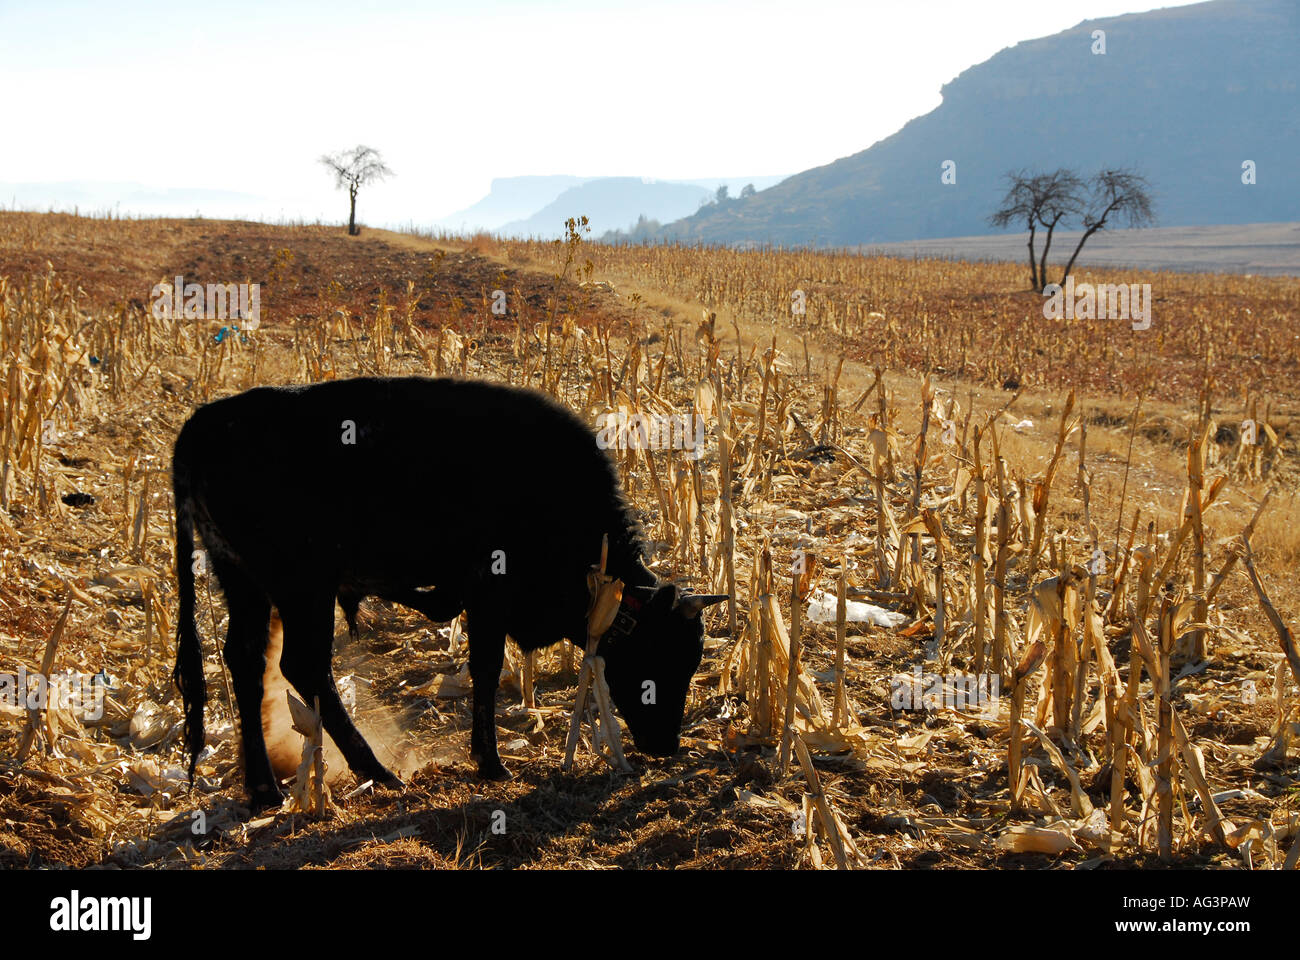 Young bull eating dry maize/corn cobs in winter, Lesotho, Africa Stock Photo